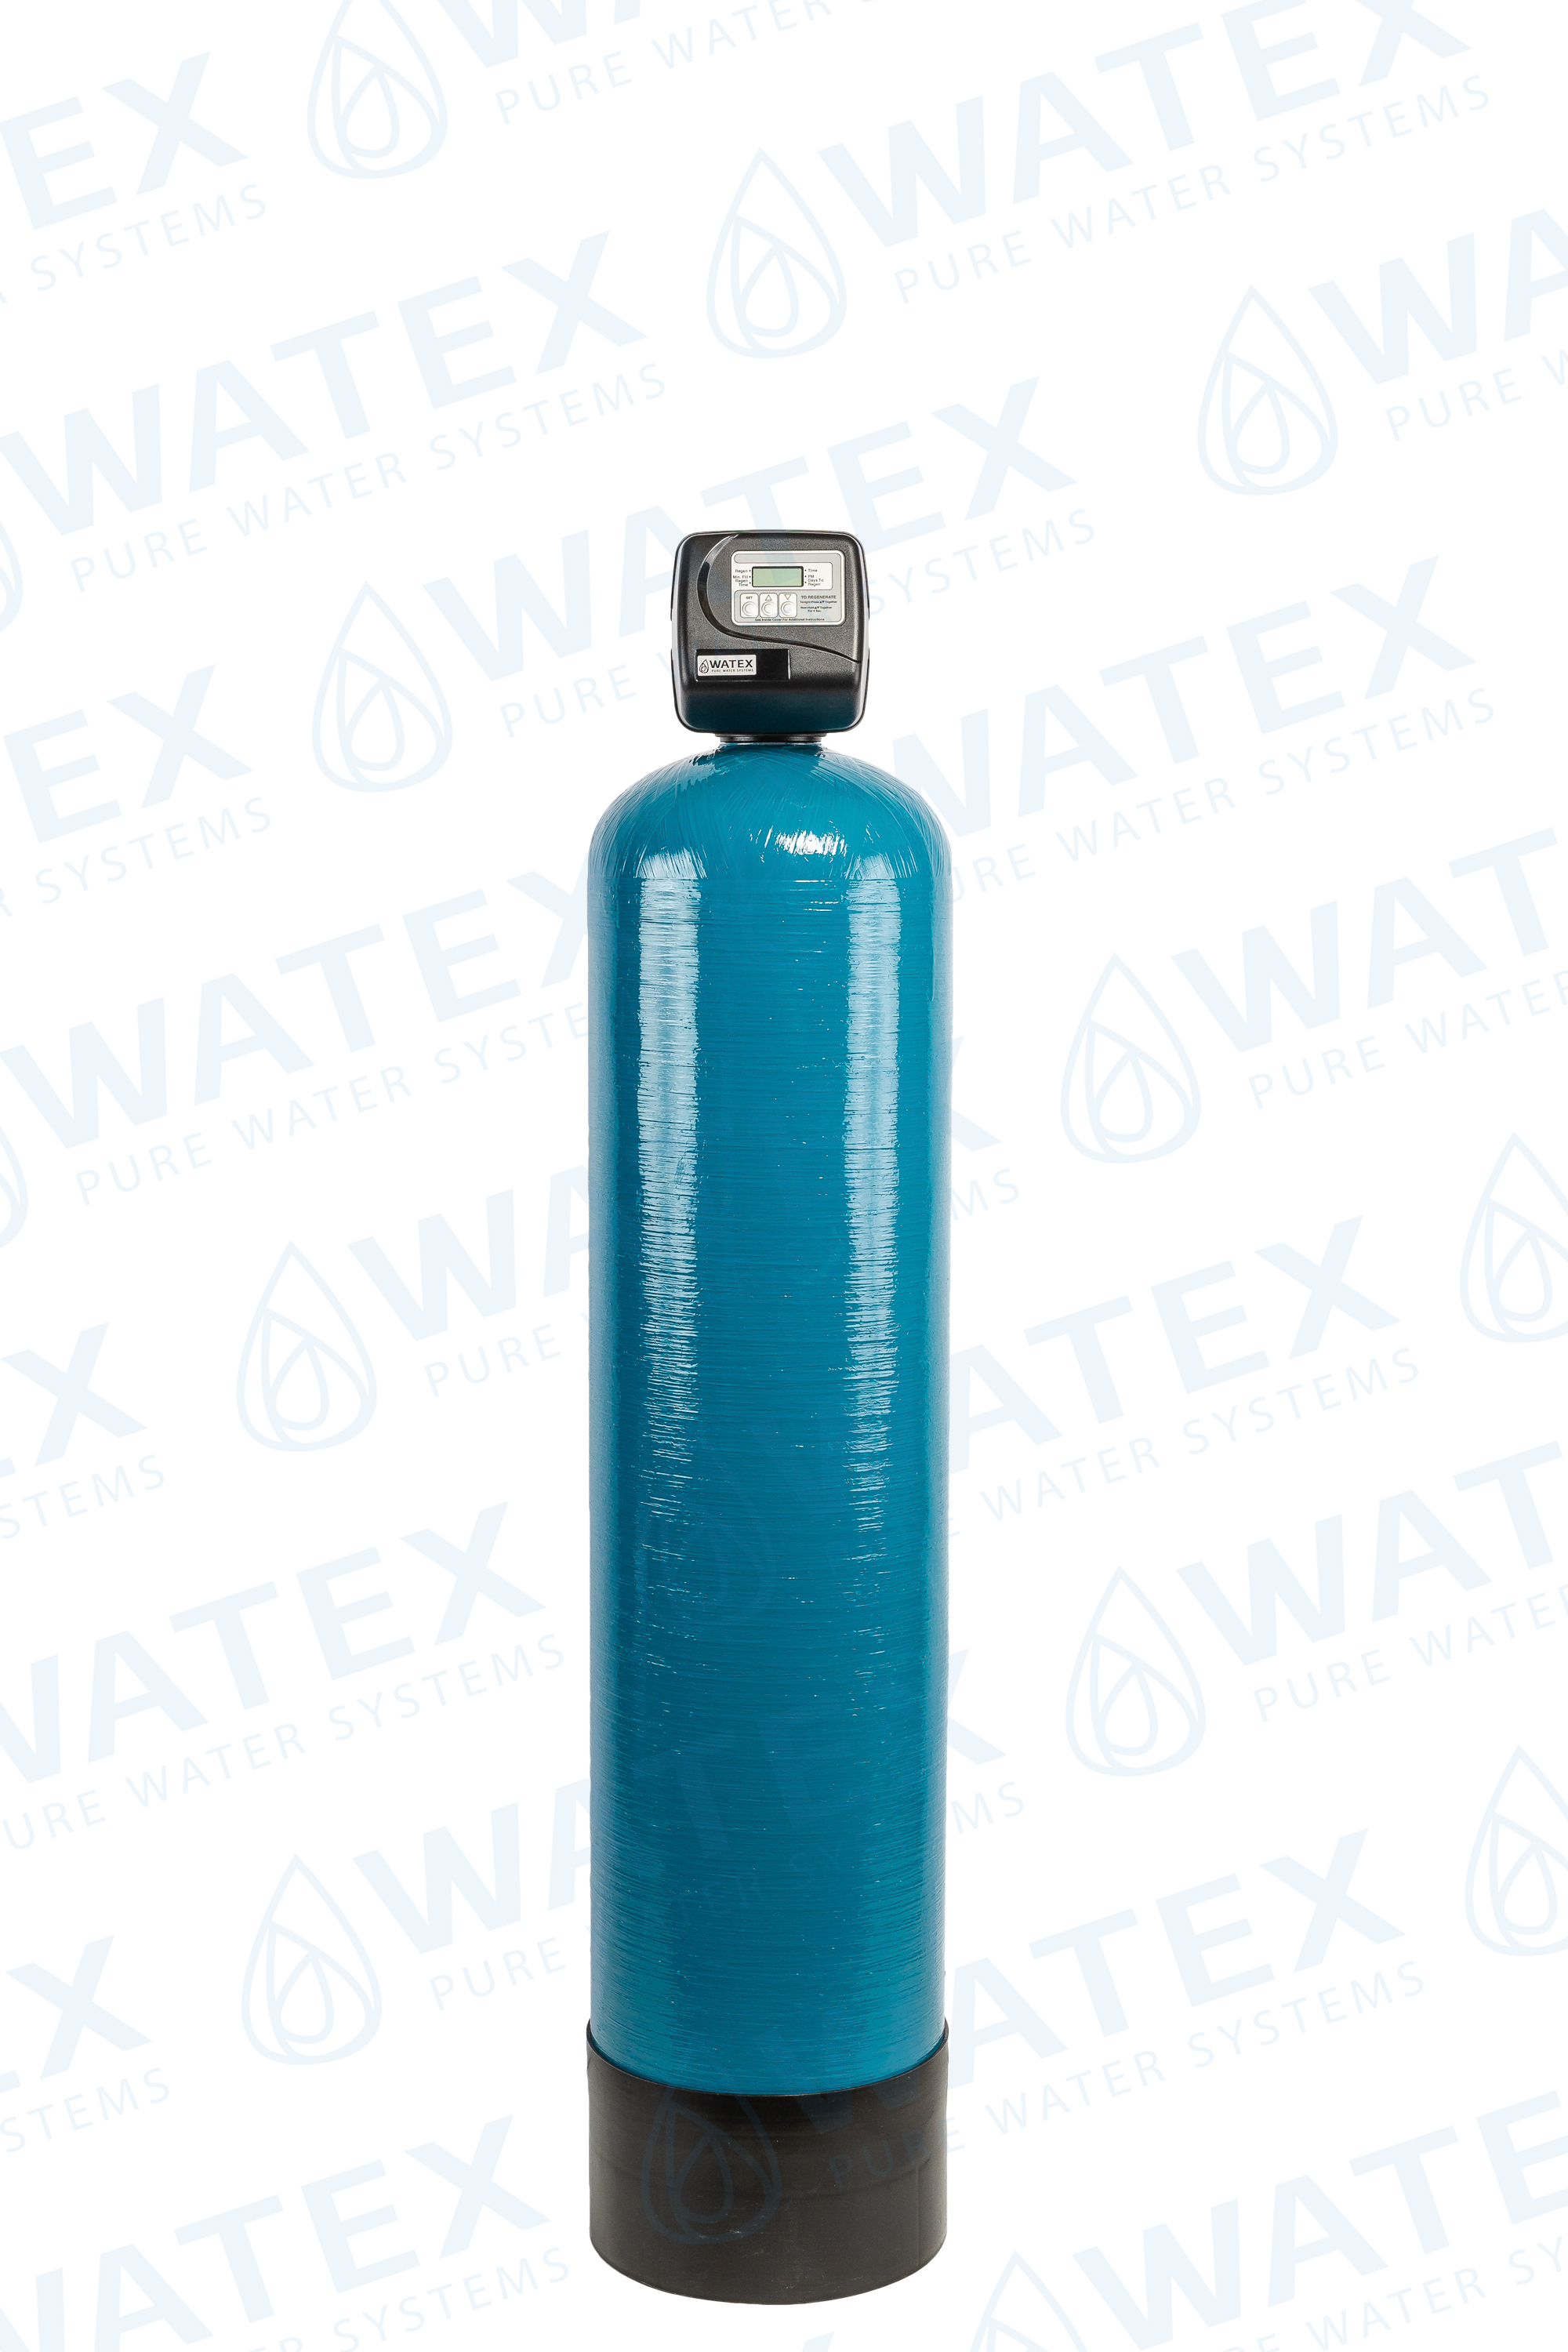 Softener cleaner IRON OUT - WATEX